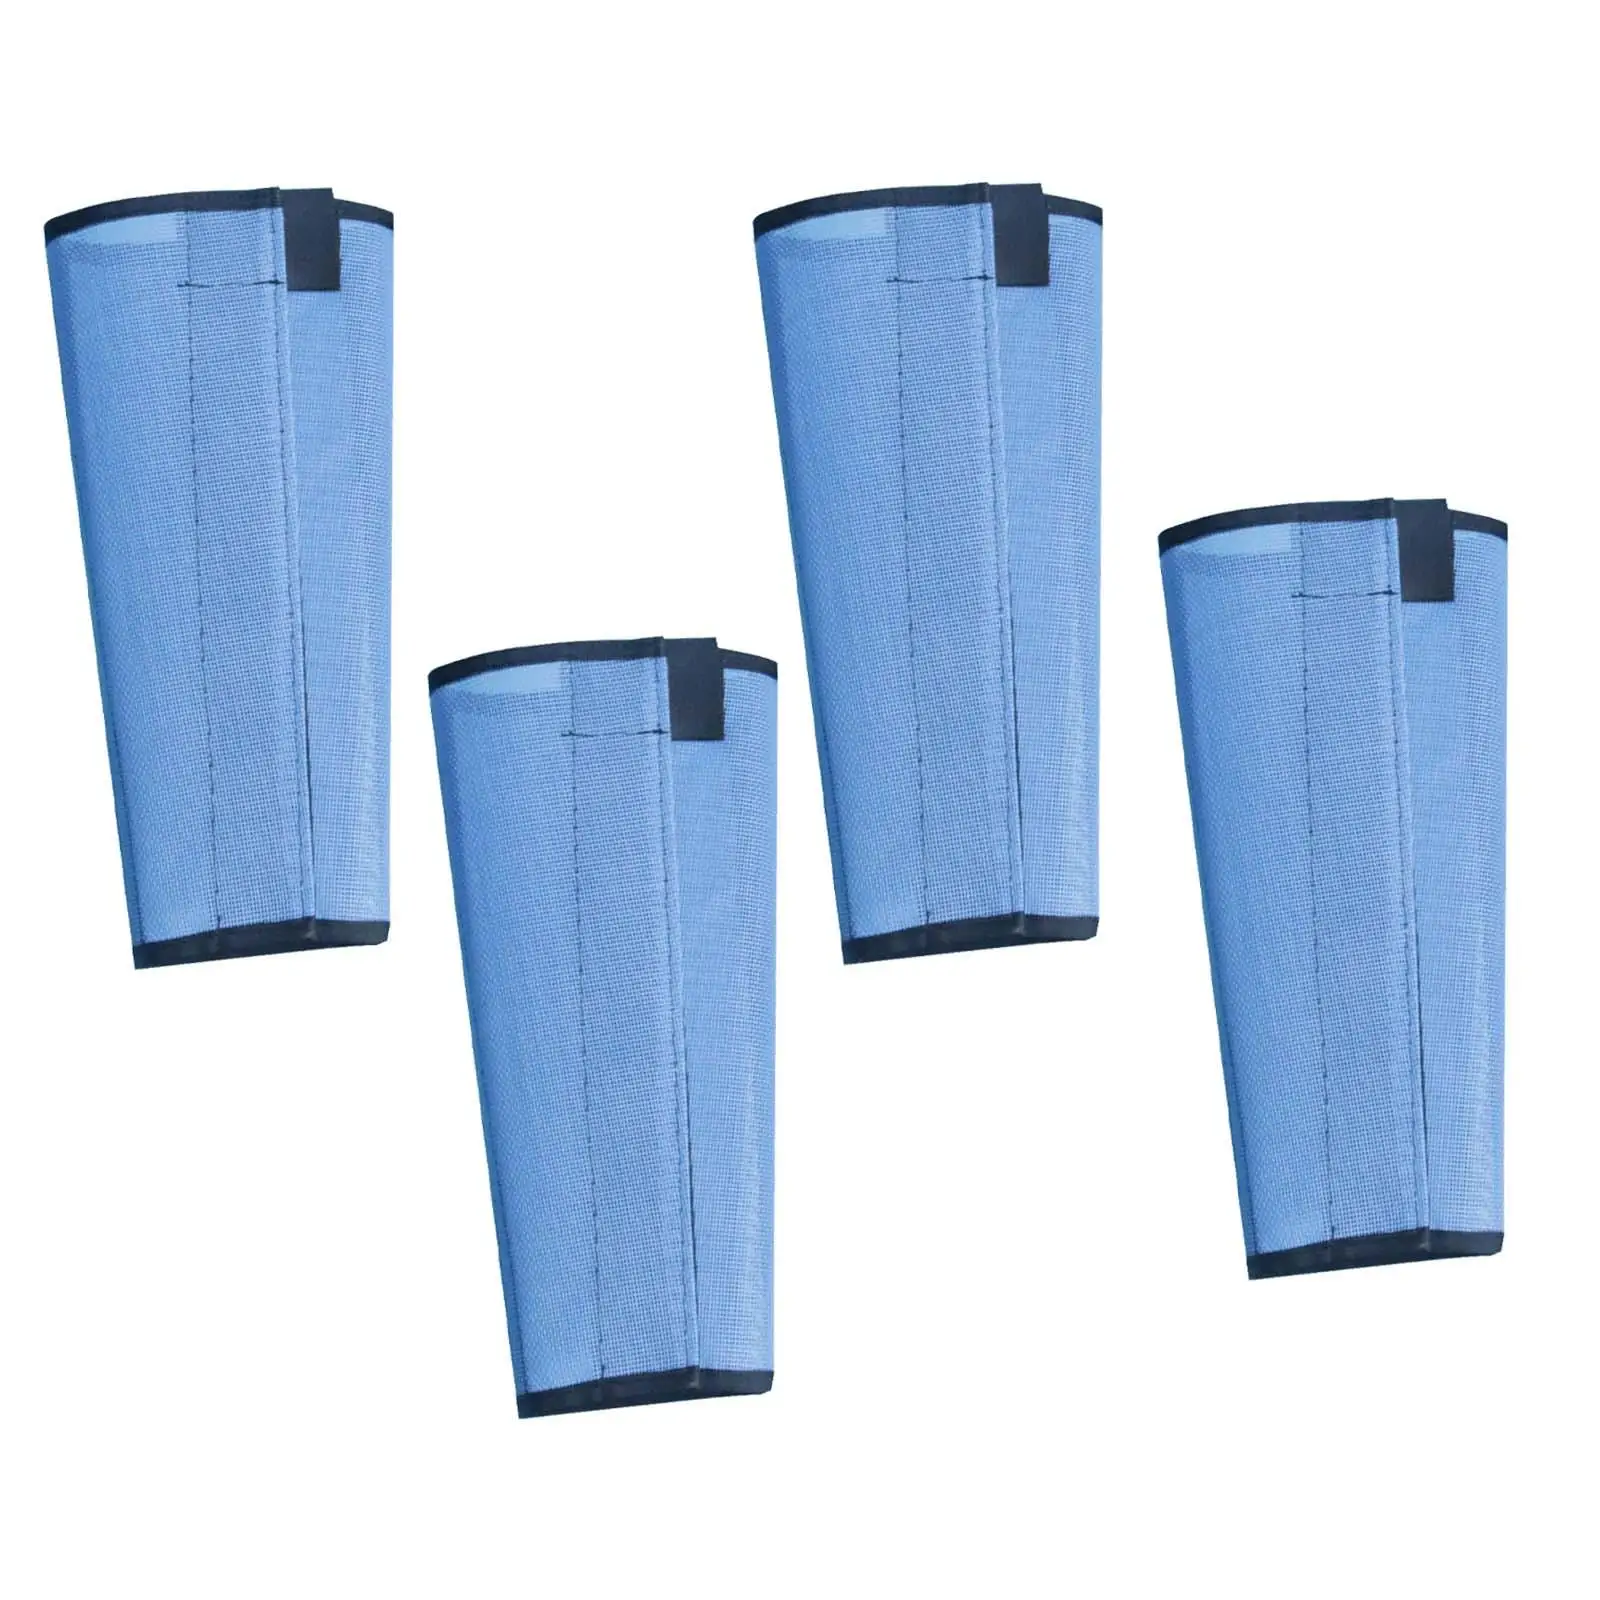 4Pcs Horse Fly Leg Boots Blue Loose Fitting Mesh Protective Gear Horse Leggings Breathable for Eventing Outdoors Sports Training